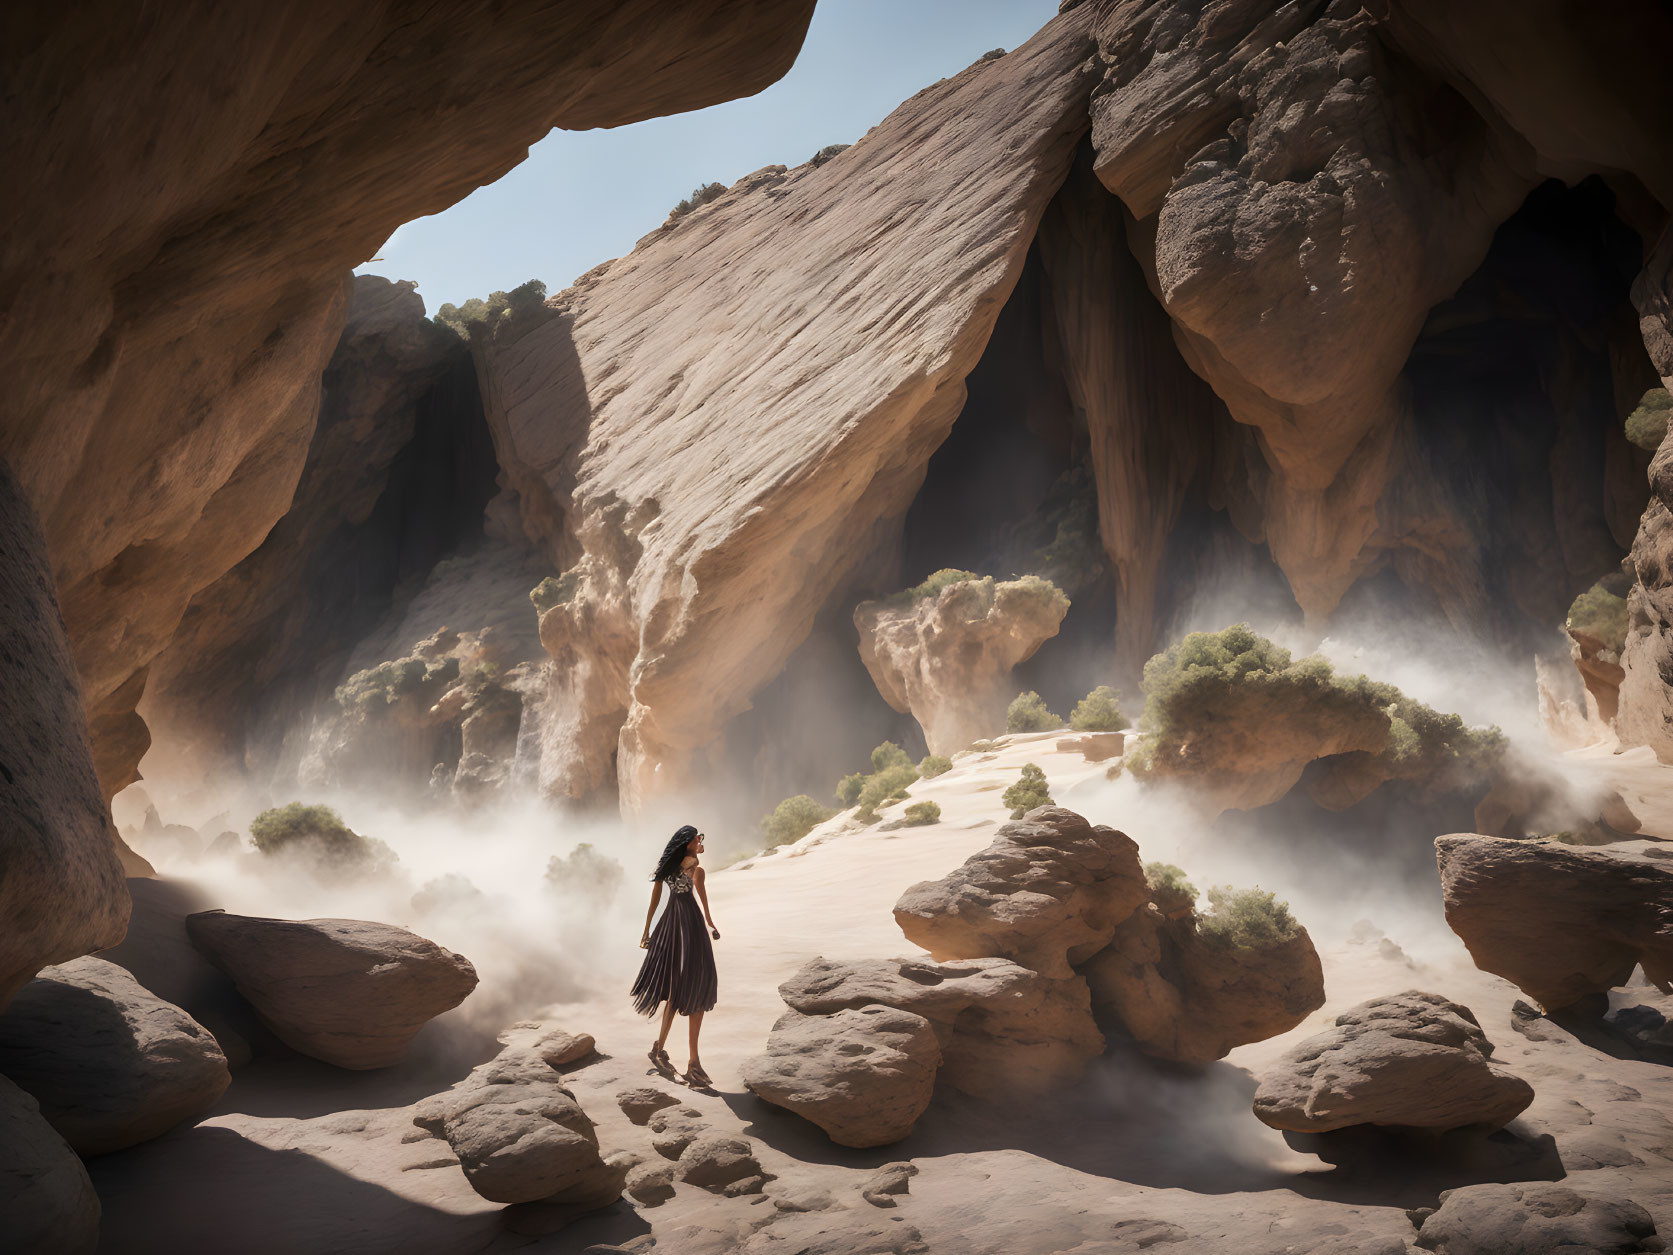 Person standing in cavernous desert landscape with sunlight filtering through, creating mystical ambiance.